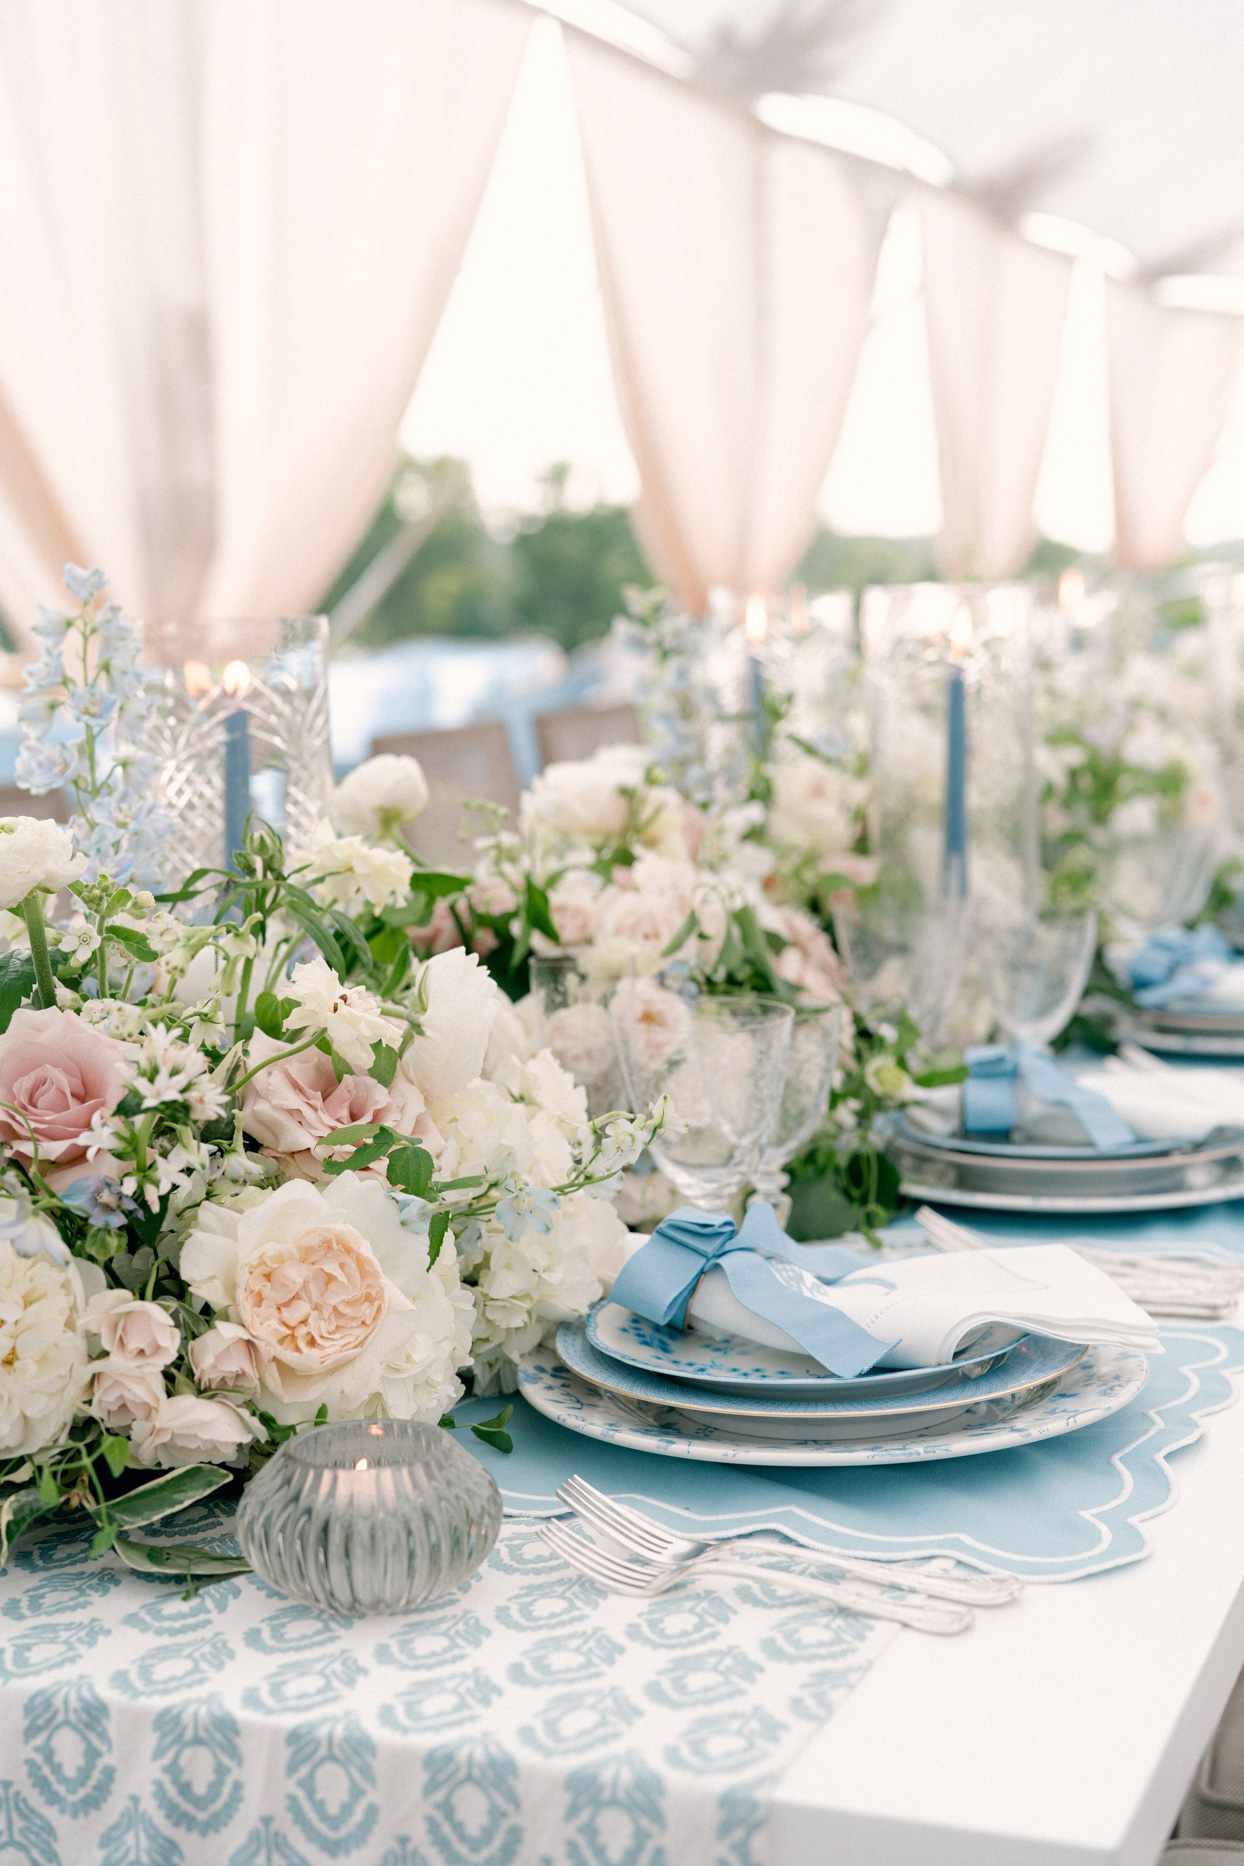 reception table with blue printed table runner and blush flowers